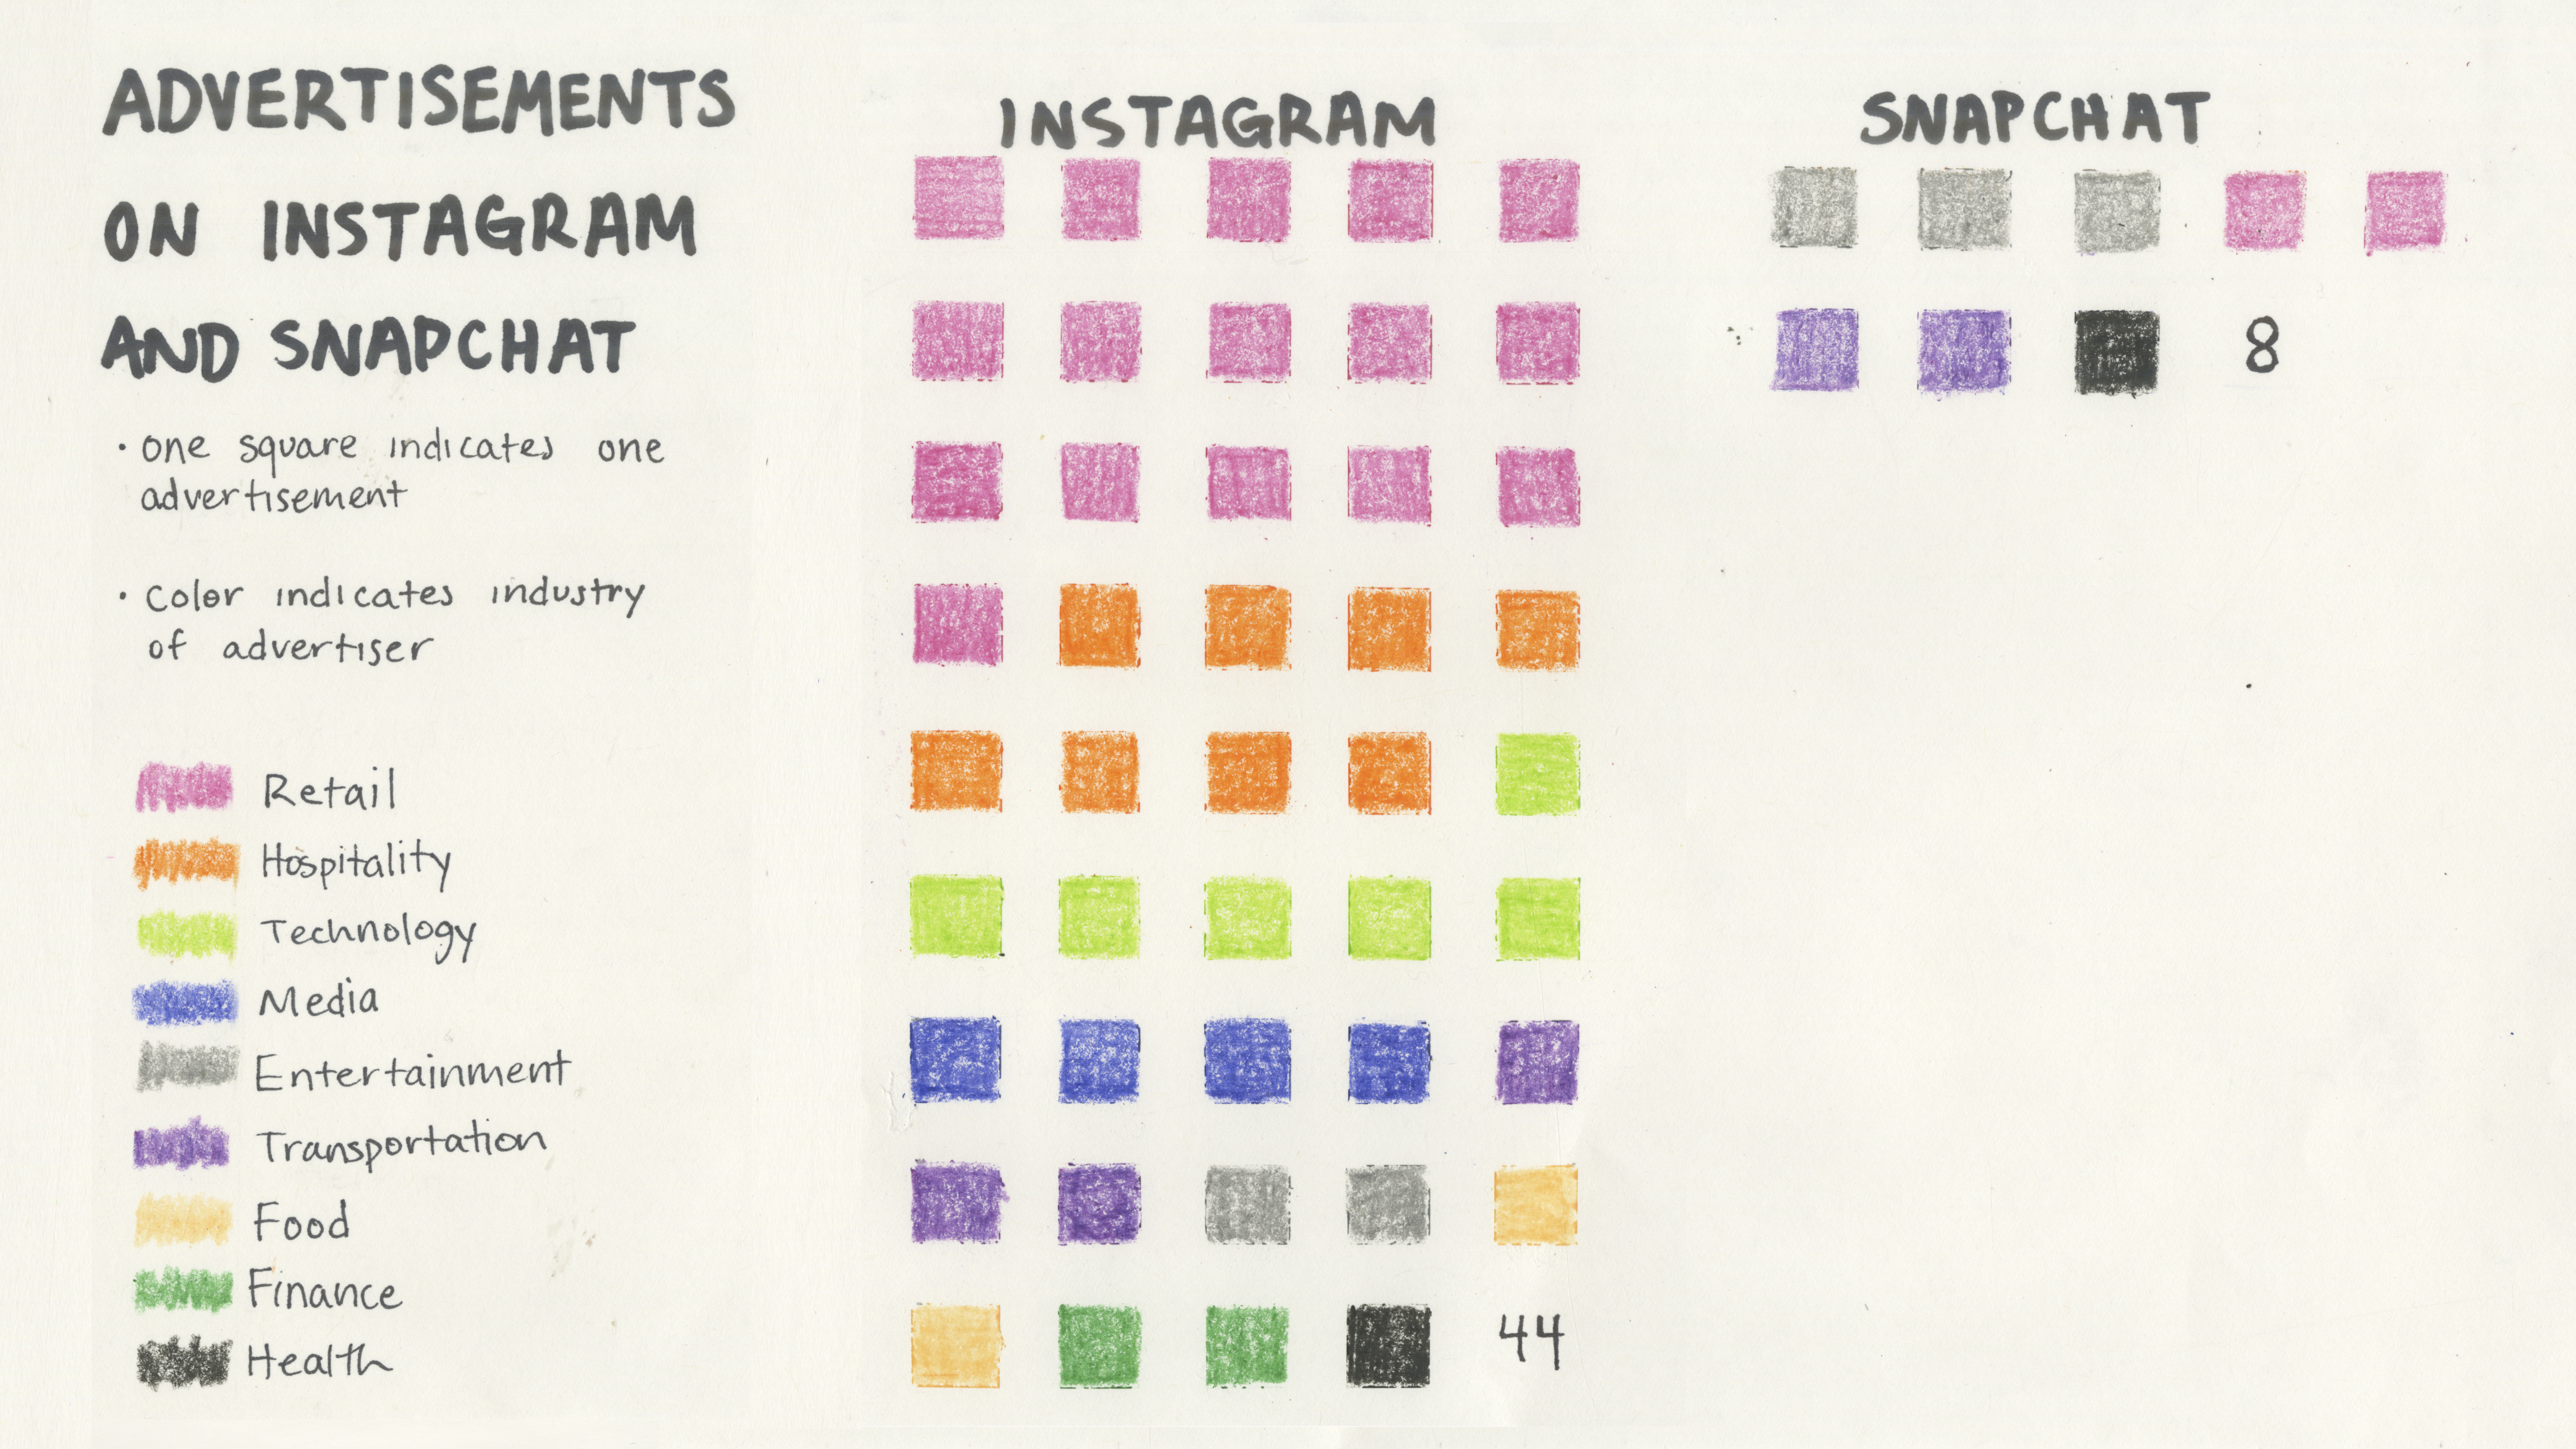 Data Visualization: Advertisements on Instagram and Snapchat